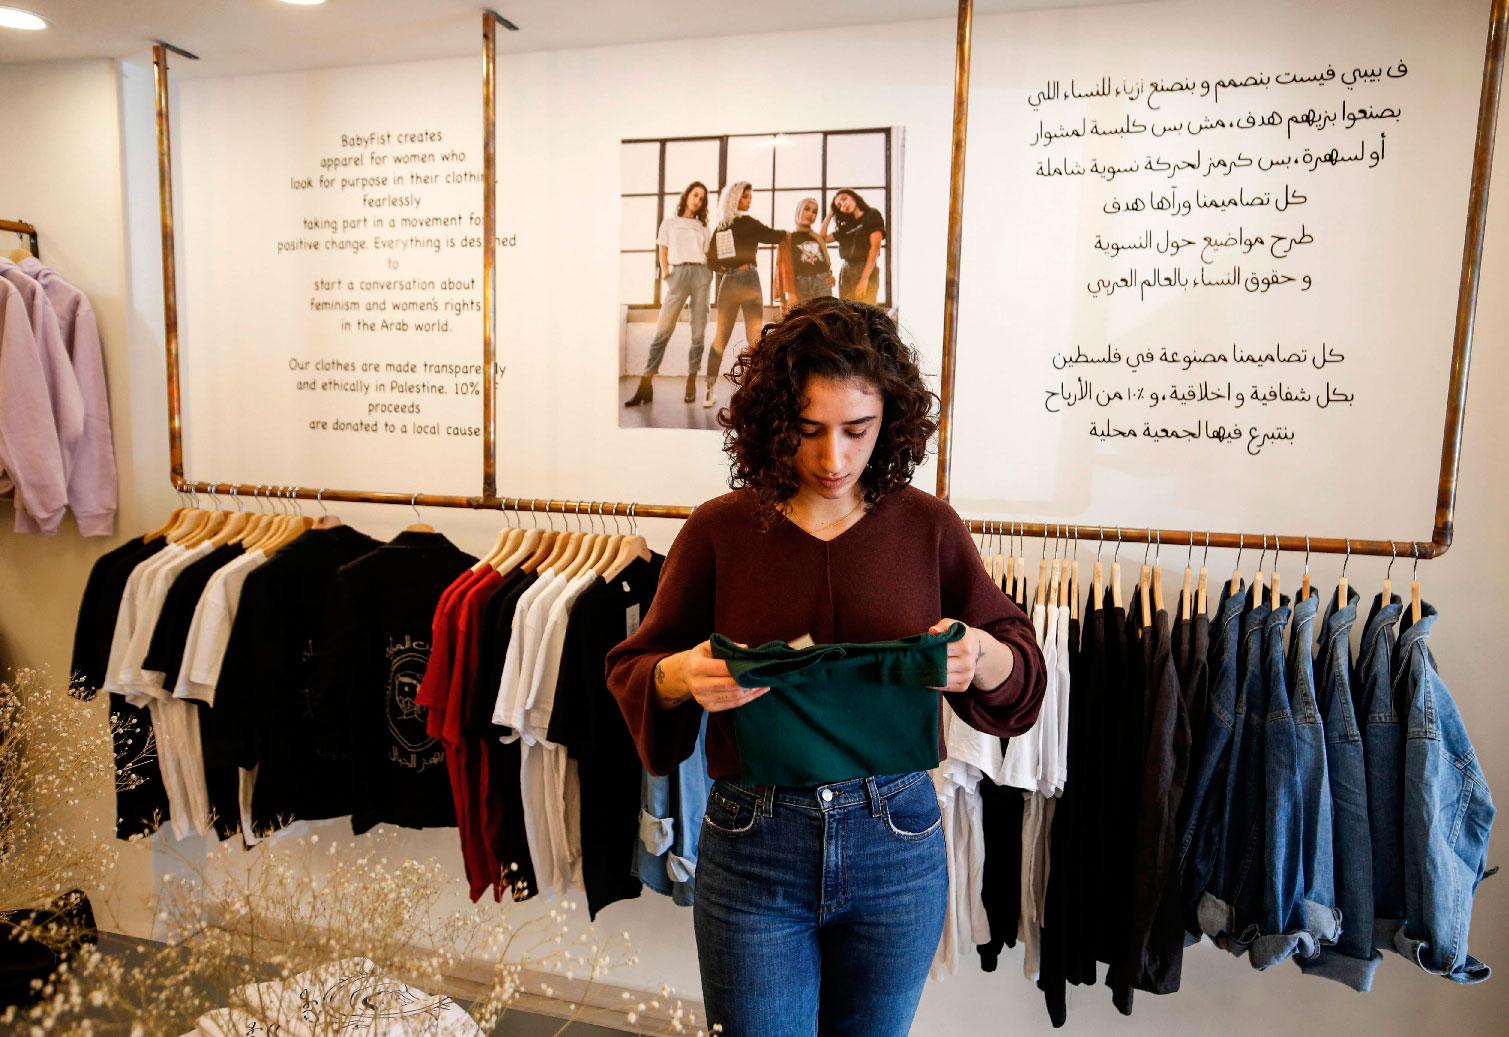 Palestinian fashion designer Yasmeen Mjalli speaks while standing in her clothing shop where her label collection "BabyFist" carrying anti-sexual harassment slogans is showcased, in Ramallah in the Israeli-occupied West Bank on December 19, 2018.